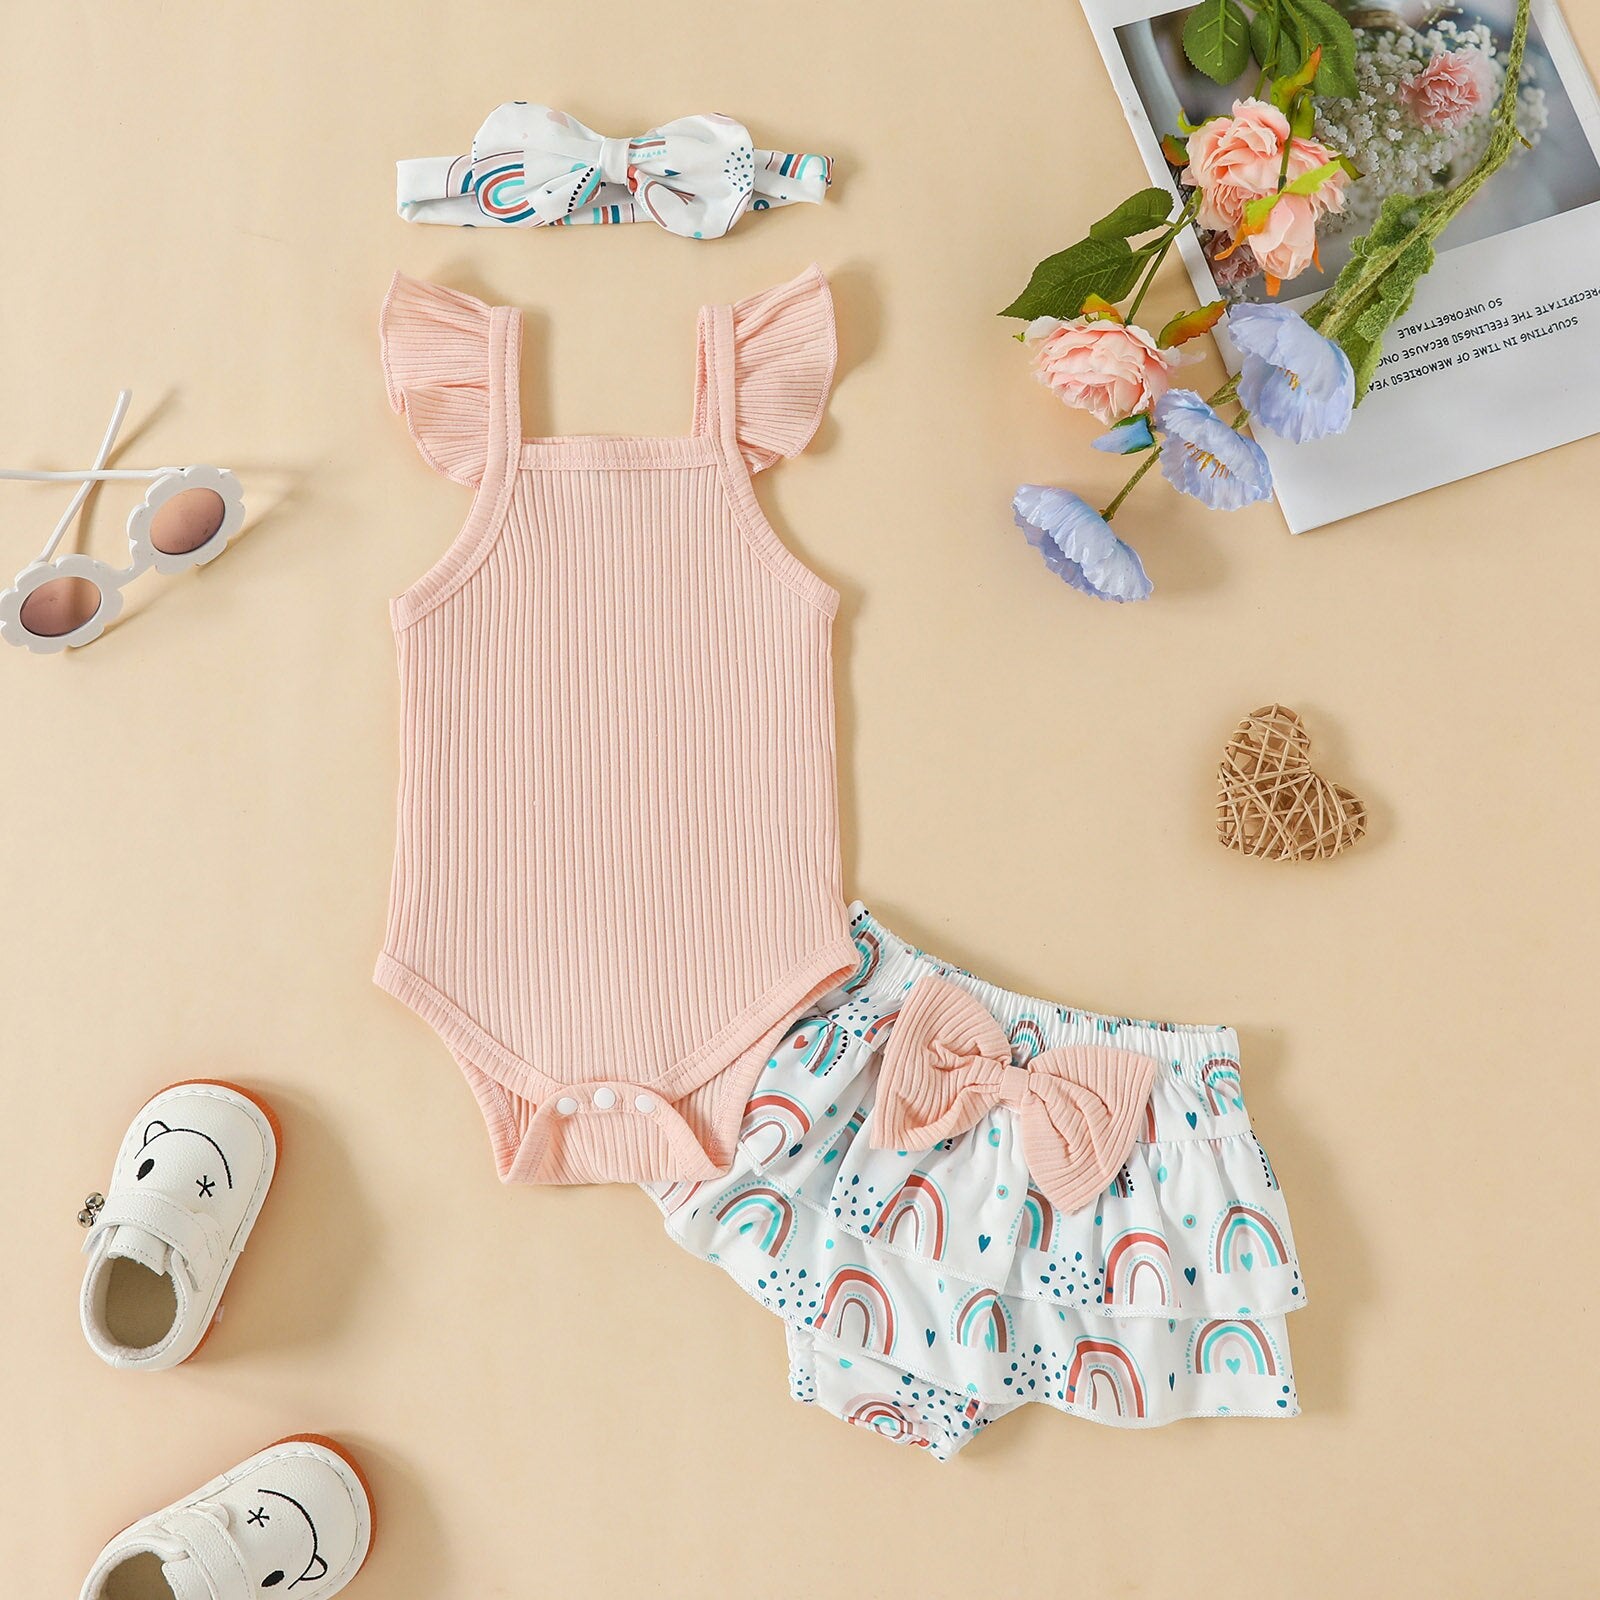 Baby Products Online - Citgeett Summer Baby Clothes Set with Knit